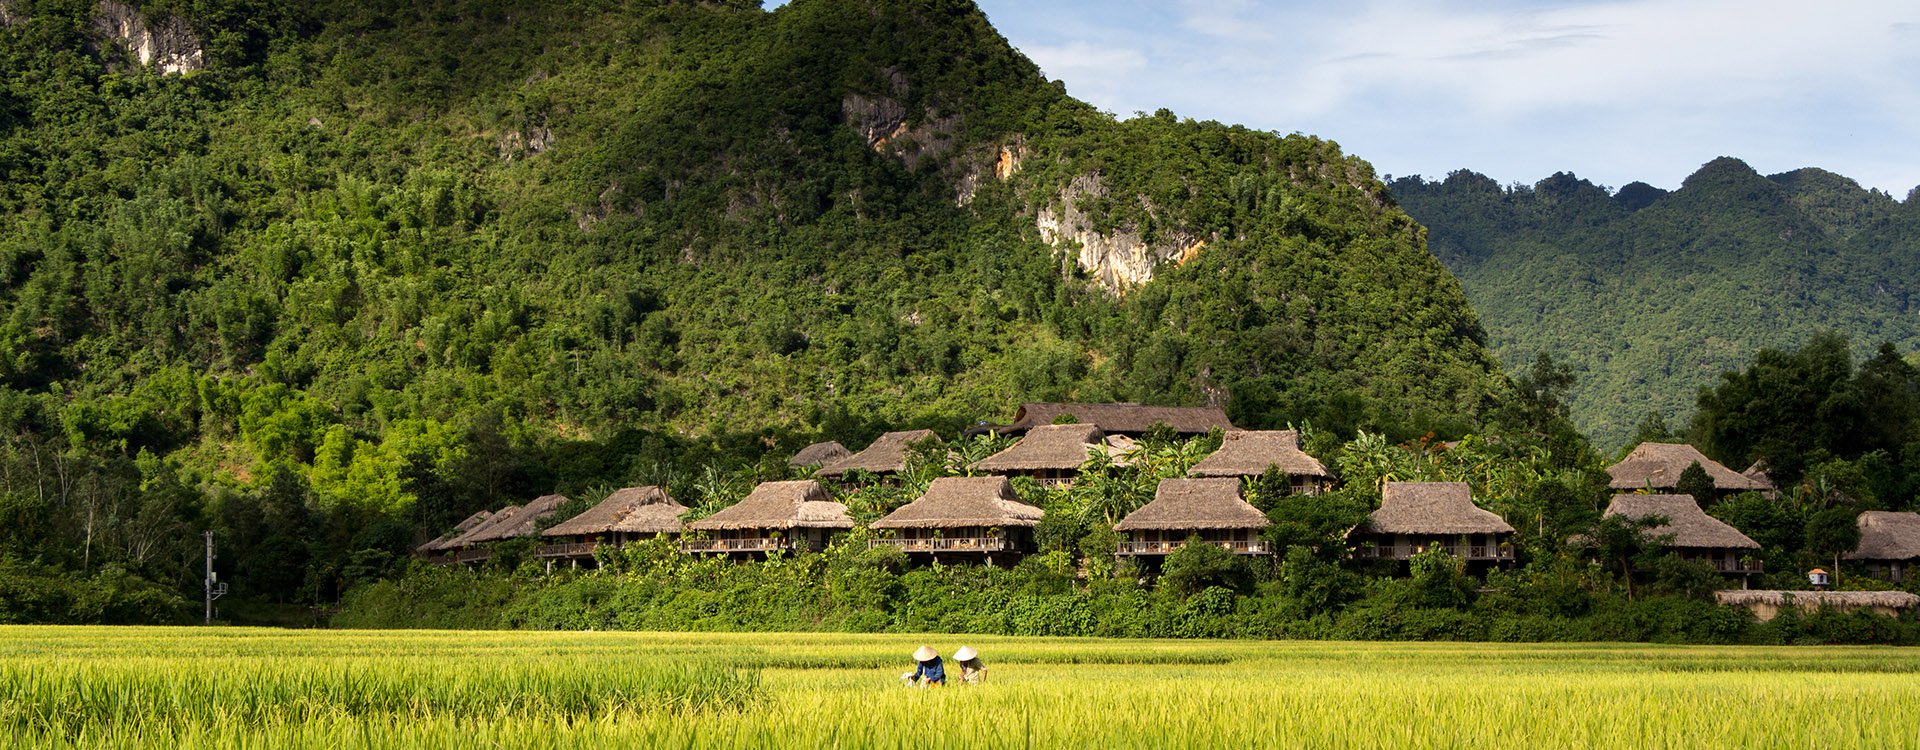 A cluster of homestays on a hillside and rice field in Mai Chau Vietnam